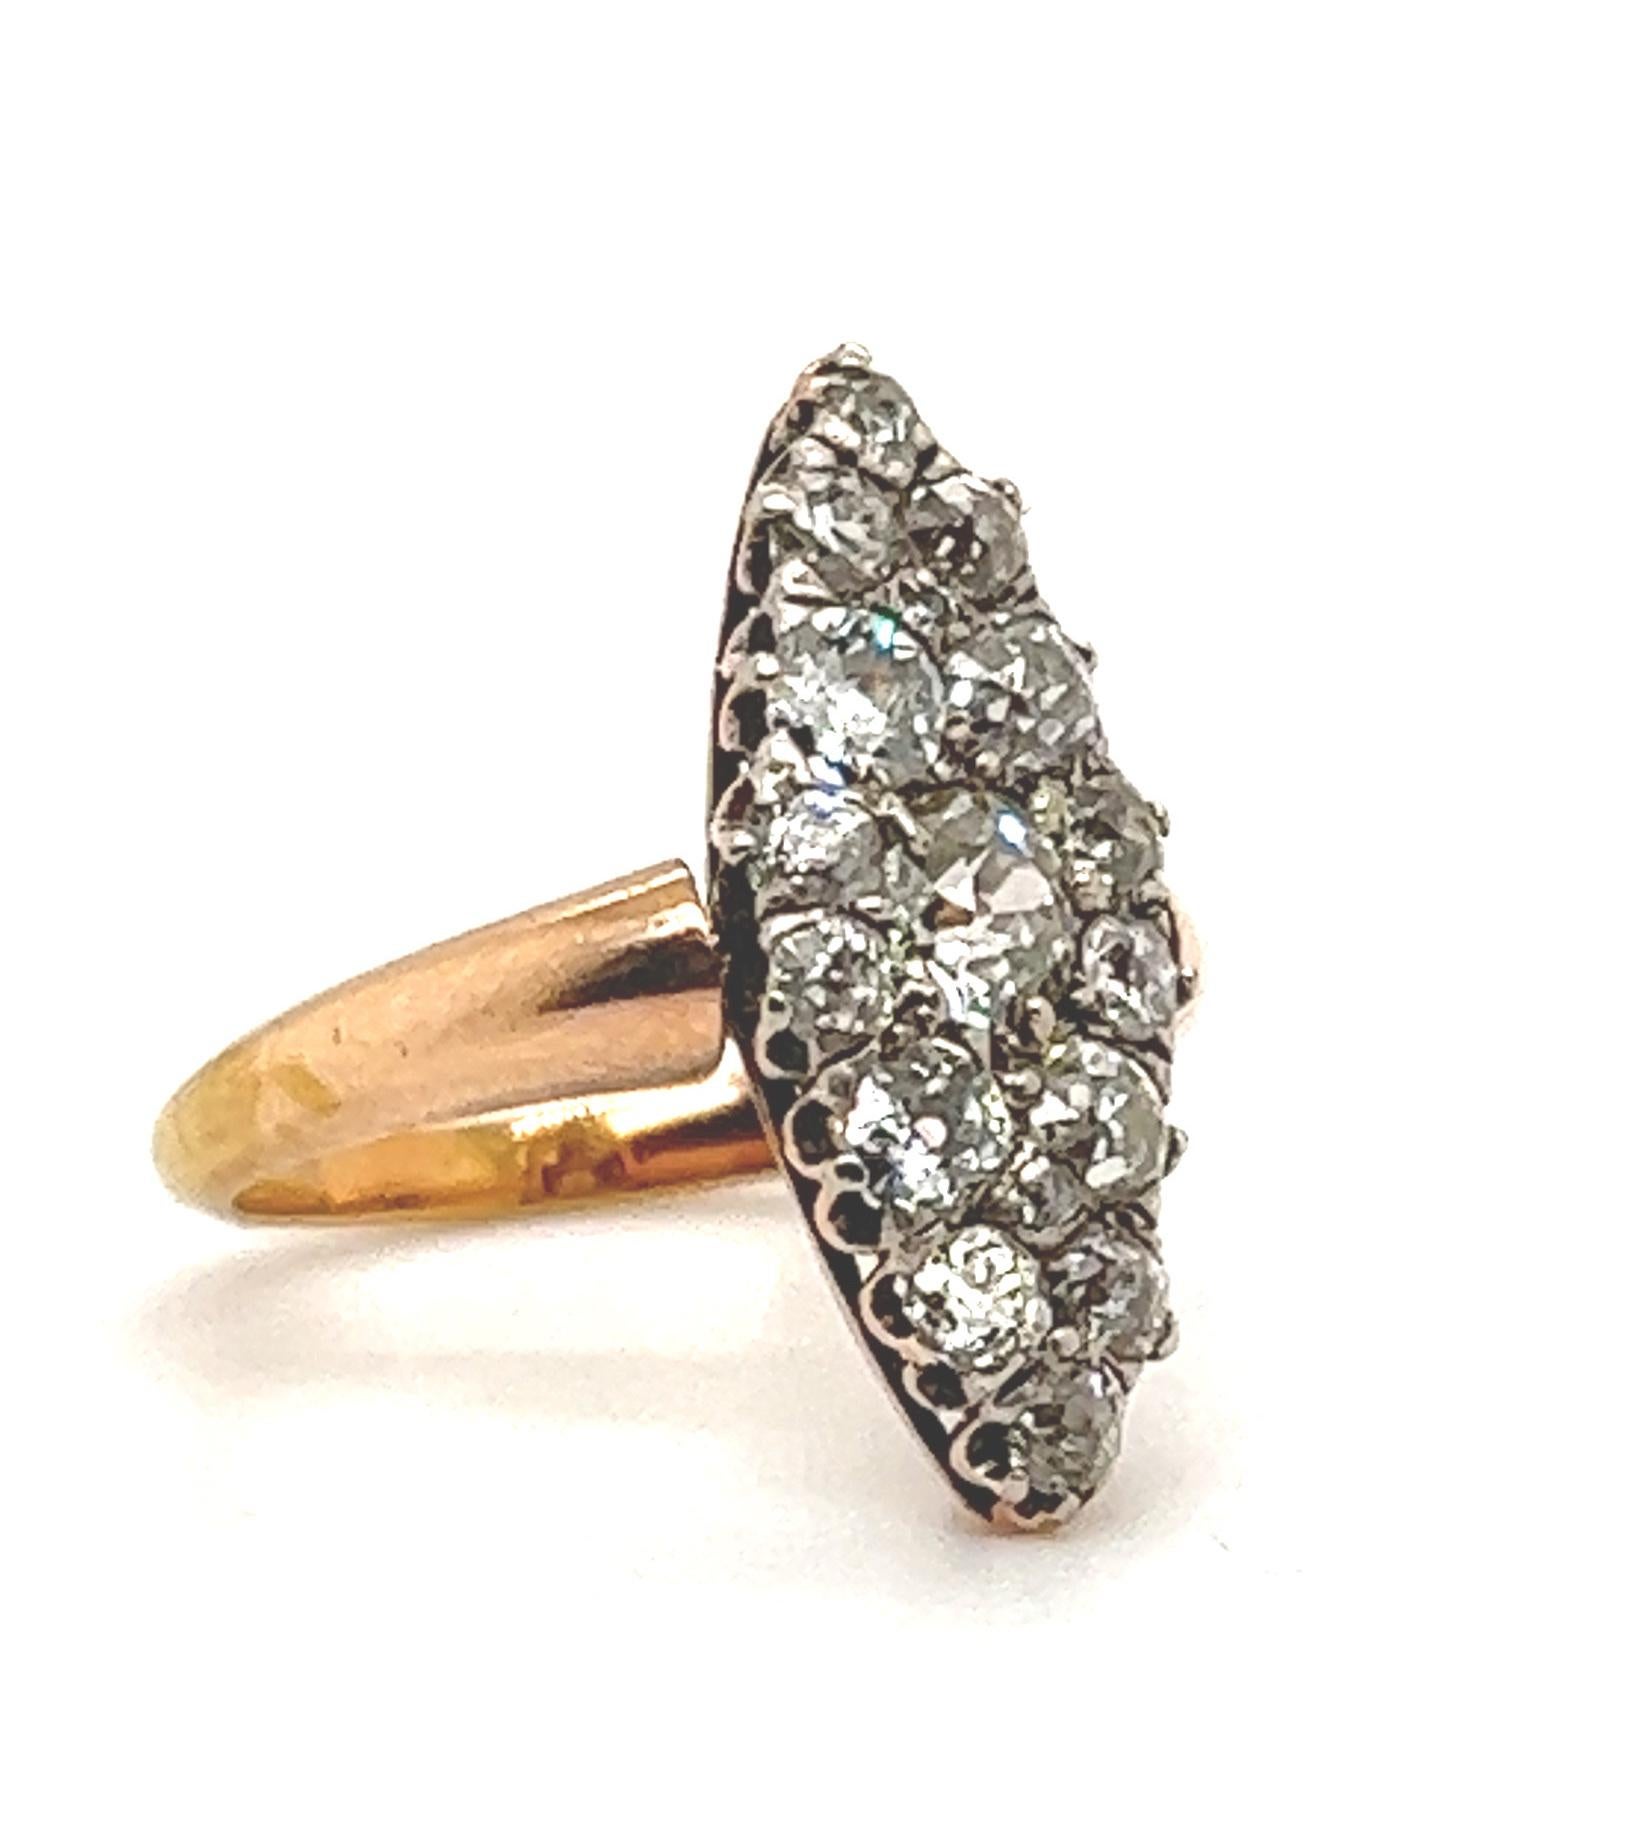 Elegant and classic design seen on this Victorian diamond navette ring. The ring is set with old mine cut diamonds in a cluster formation. All diamonds in the design graduate in size looking like one large cut antique marquise cut diamond. This